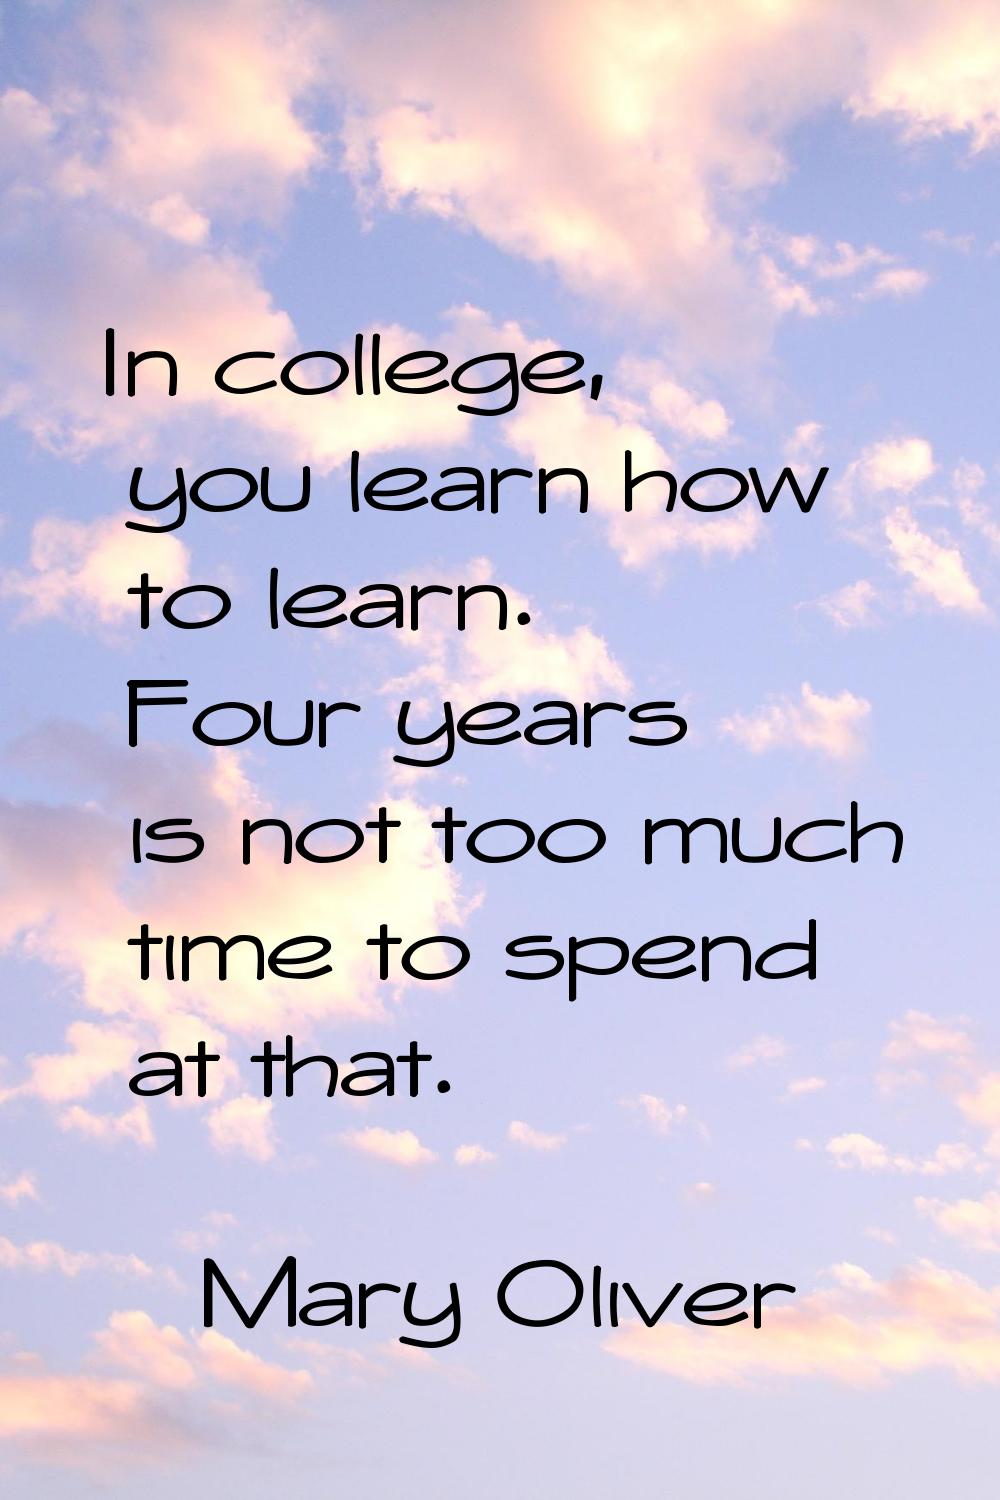 In college, you learn how to learn. Four years is not too much time to spend at that.